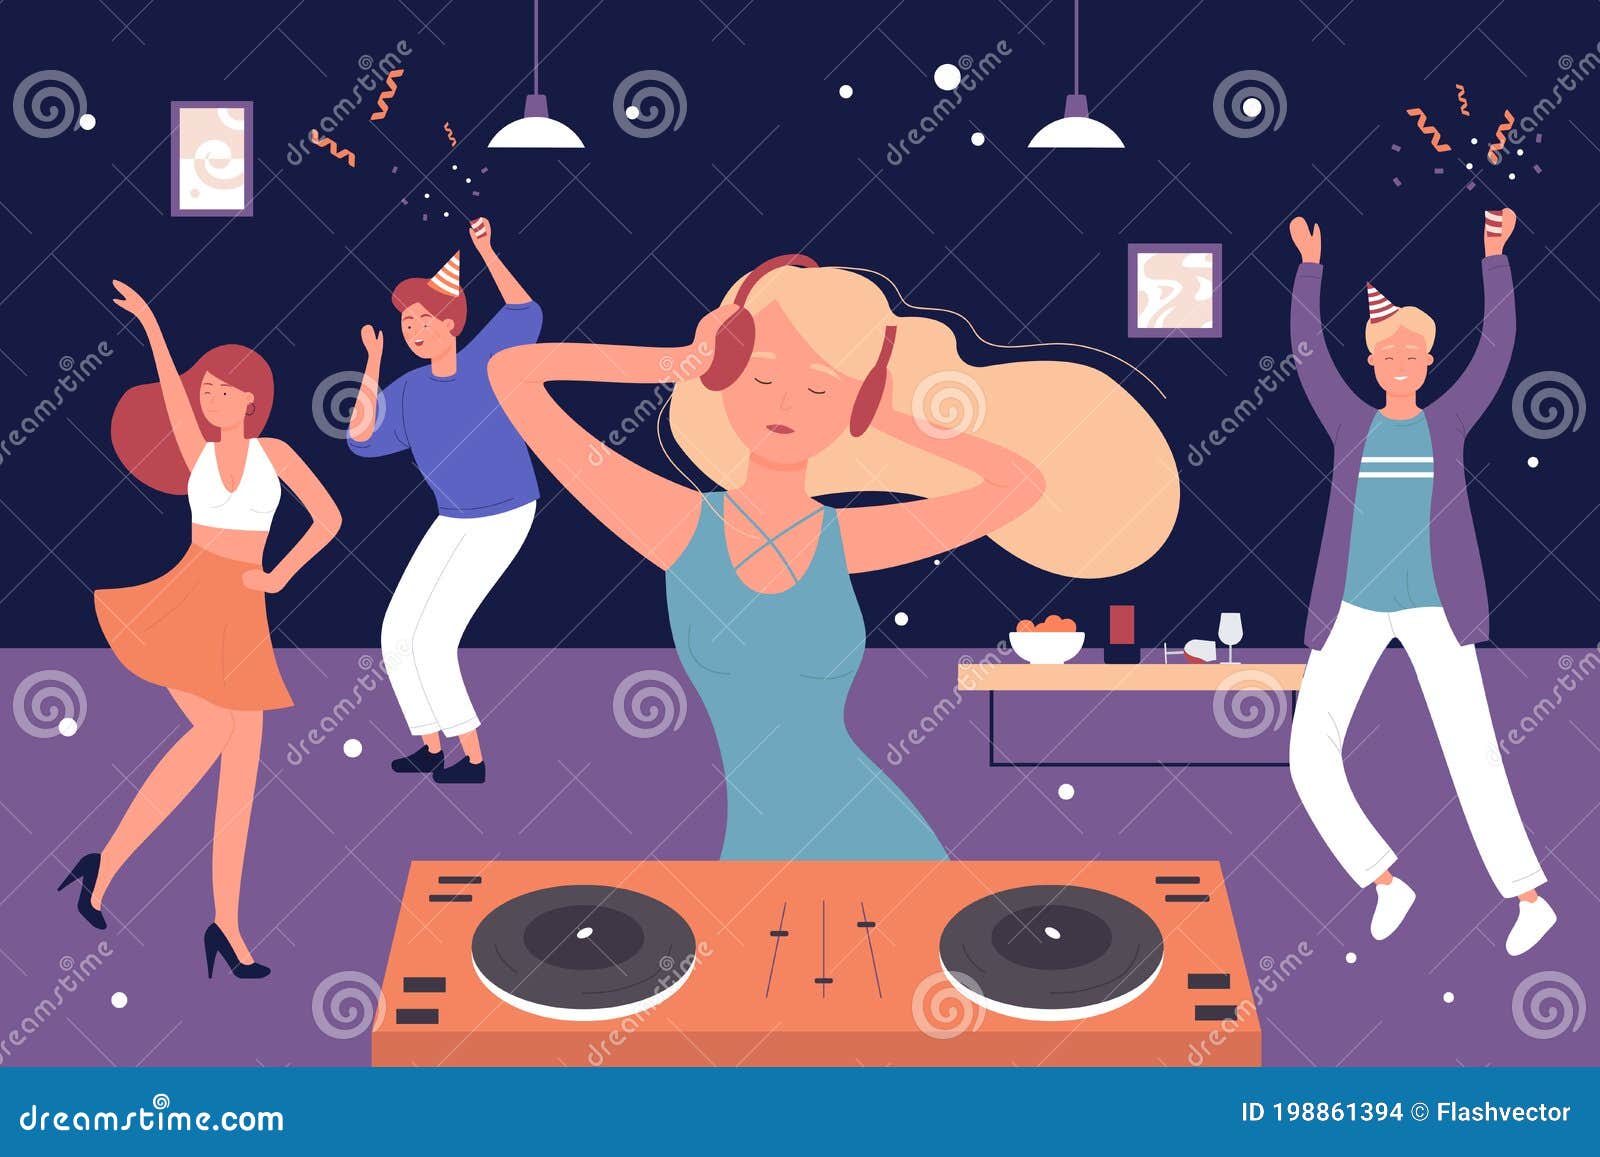 Home Musical Party,cartoon Friends People Listen To DJ Music and Dancing,  Have Fun and Happy Dance Stock Vector - Illustration of gear, home:  198861394